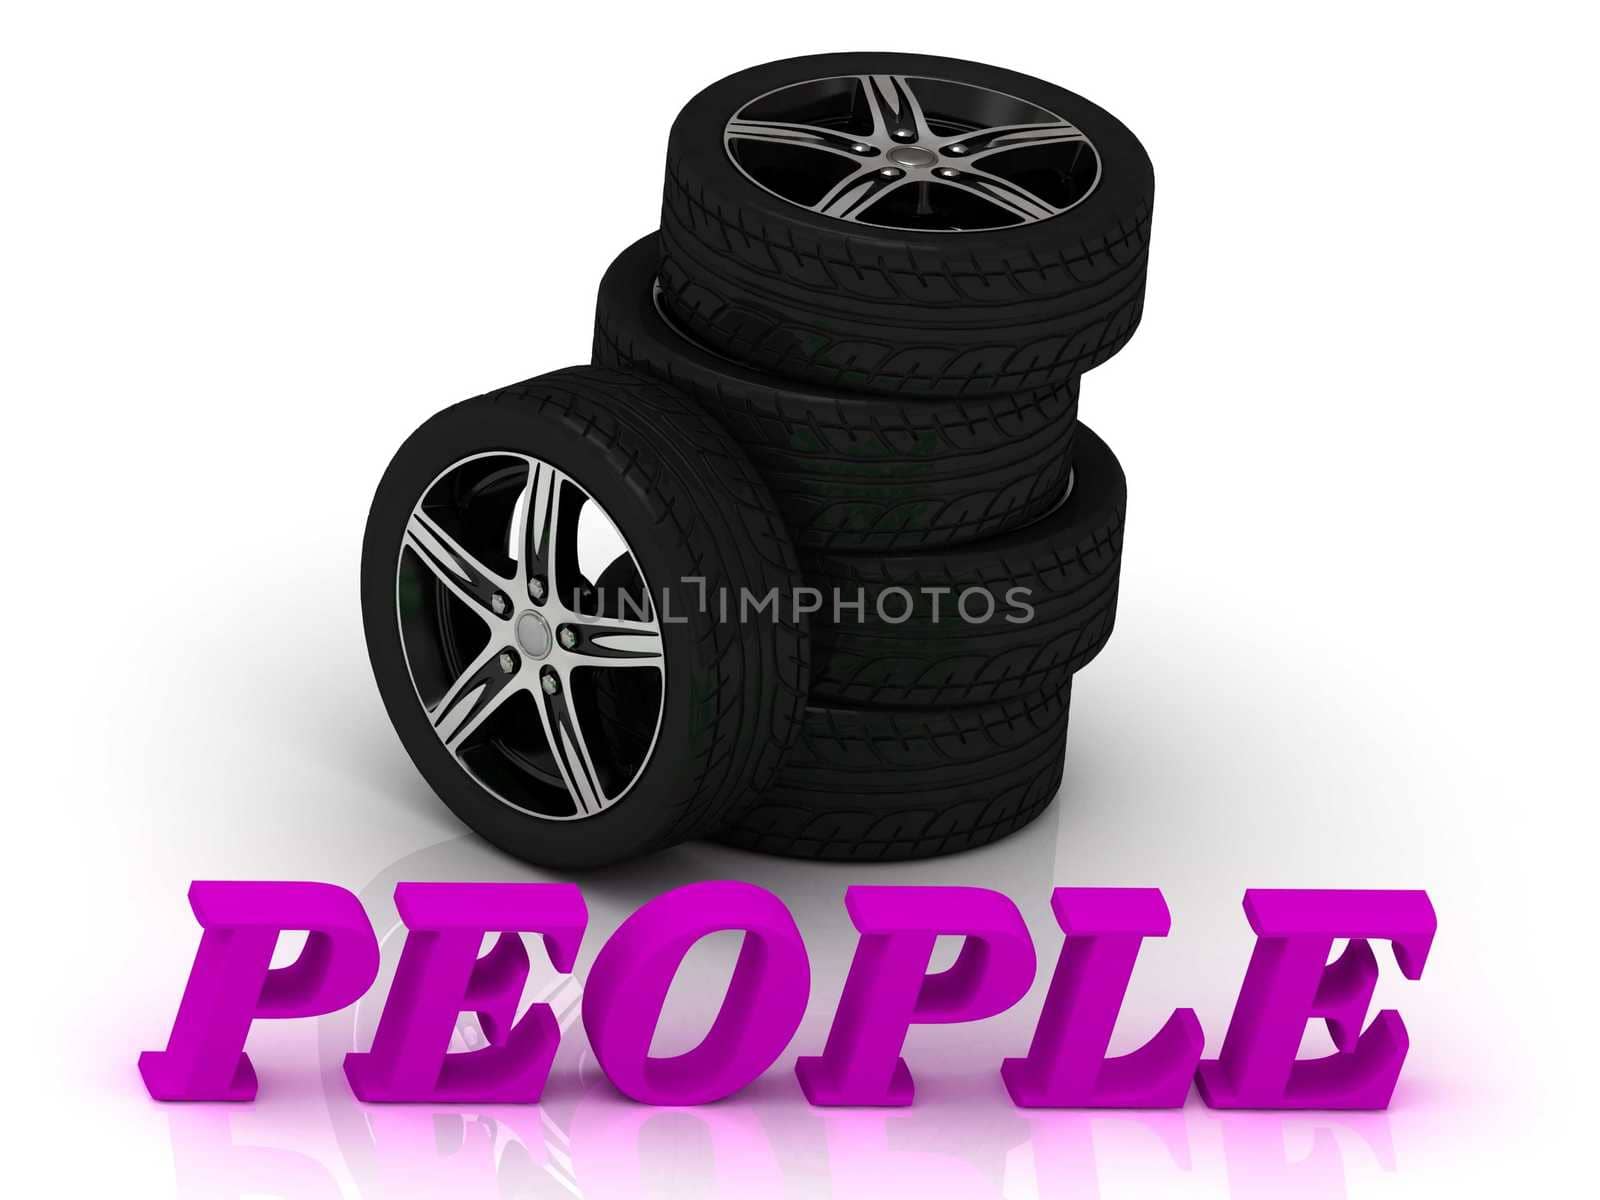 PEOPLE- bright letters and rims mashine black wheels on a white background